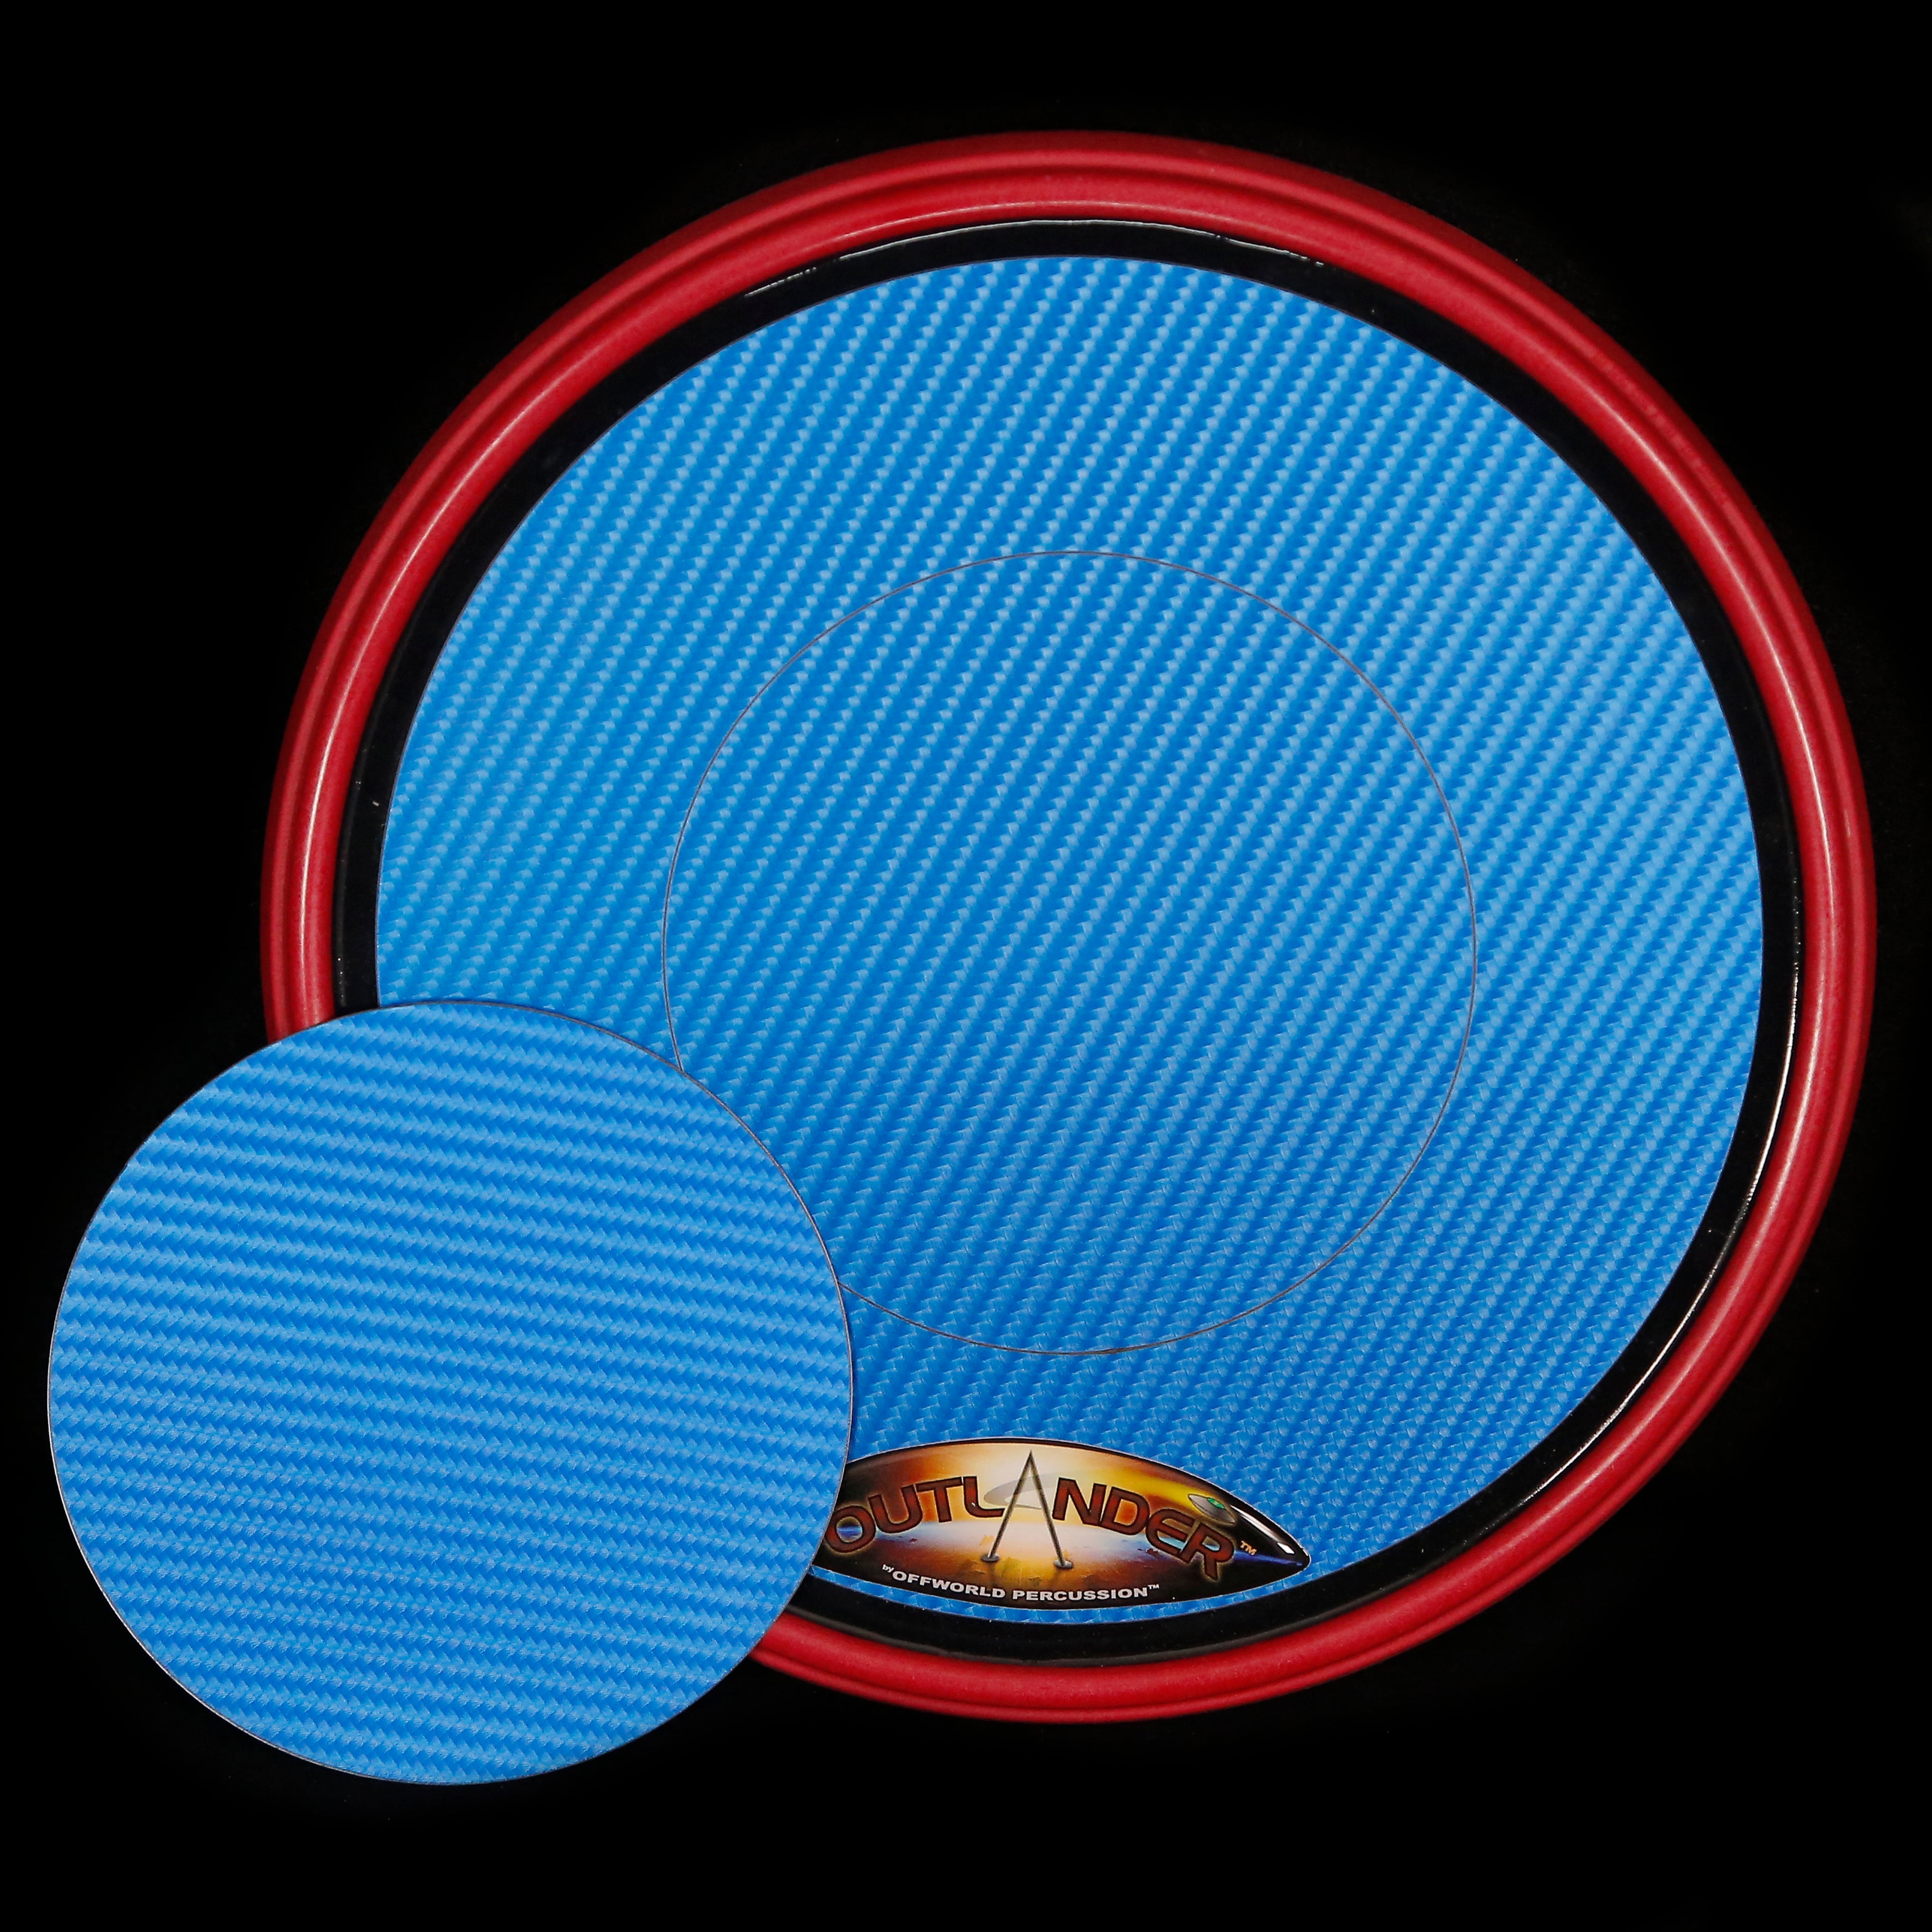 Offworld Percussion Outlander 9.5'' Small Practice Pad, 3D Blue VML, Red Rim